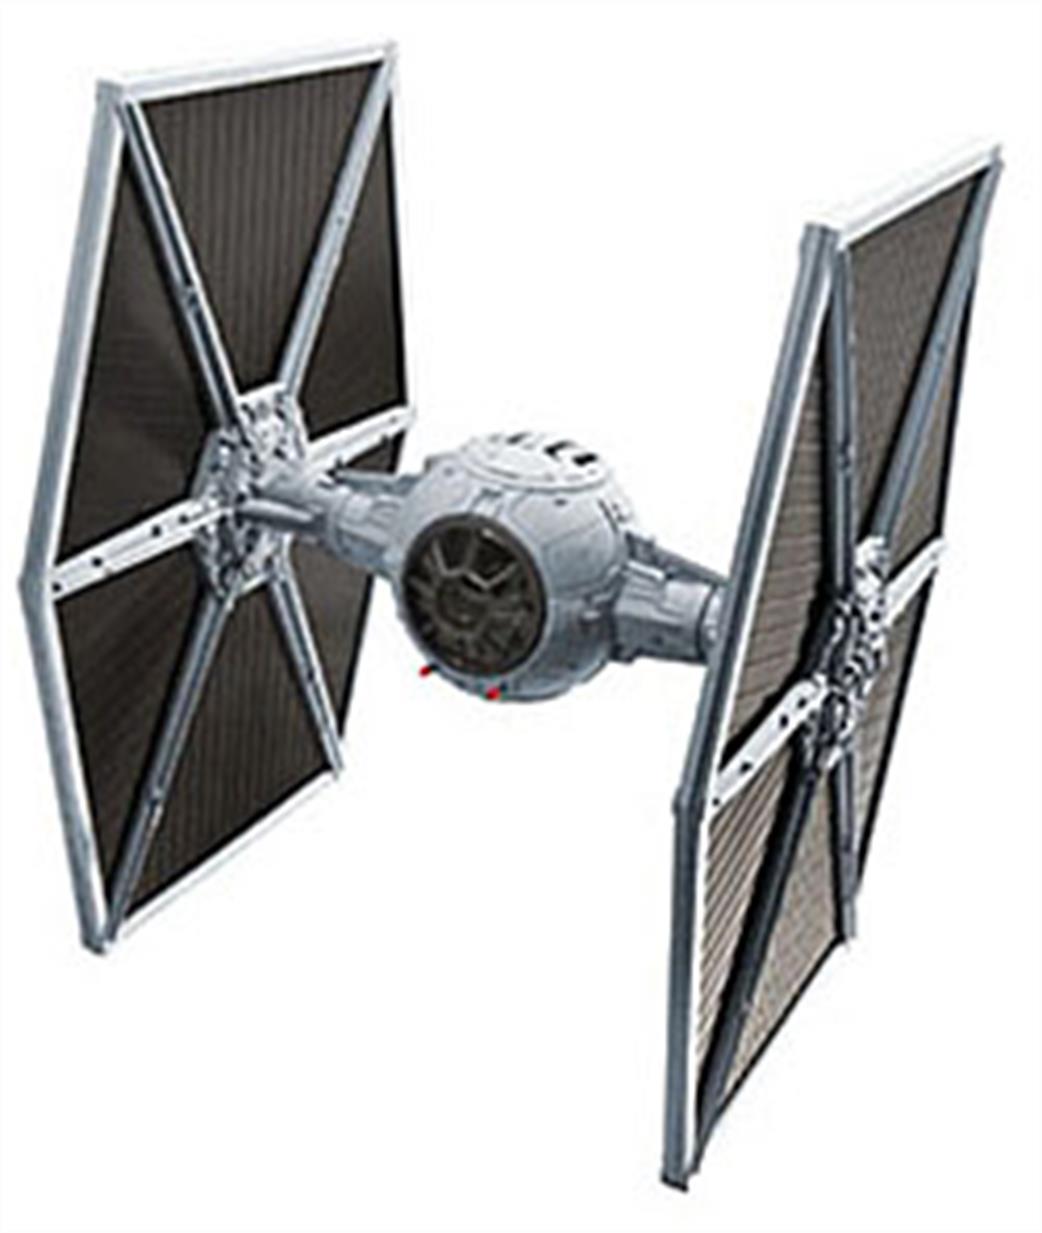 Revell 01105 Tie Fighter from Star Wars (Easy-Click Kit) 1/110